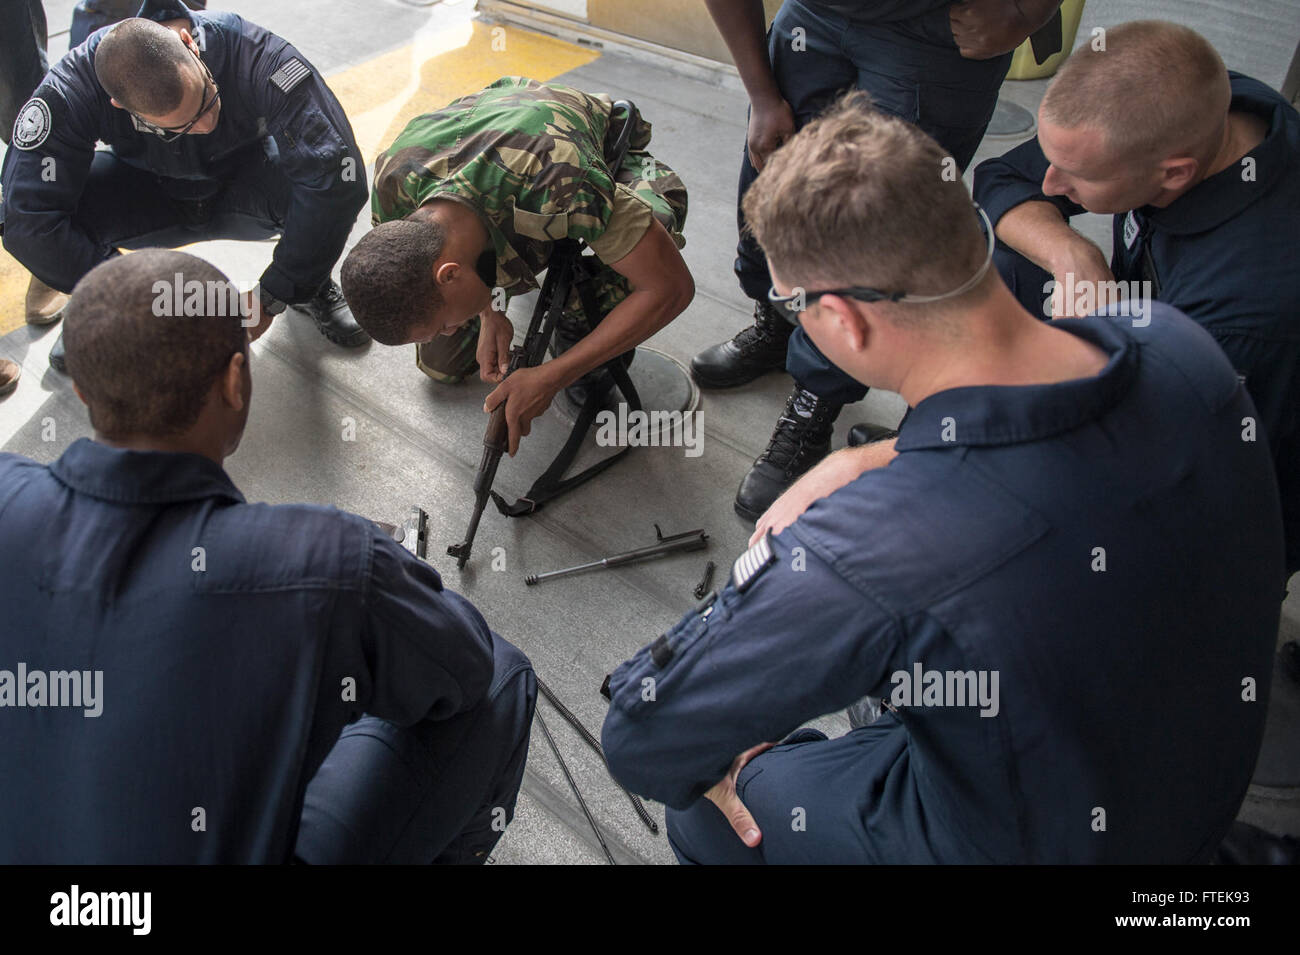 150114-N-JP249-073 ATLANTIC OCEAN (Jan. 14, 2015) Members of the Cabo Verde Coast Guard and the U.S. Coast Guard’s Law Enforcement Detachment 407 practice disassembling an AK-47 machine gun aboard the Military Sealift Command’s joint high-speed vessel USNS Spearhead (JHSV 1), Jan. 14, 2015. Spearhead is on a scheduled deployment to the U.S. 6th Fleet area of operations in support of the international collaborative capacity-building program Africa Partnership Station. (U.S. Navy photo by Mass Communication Specialist 2nd Class Kenan O’Connor/Released) Stock Photo